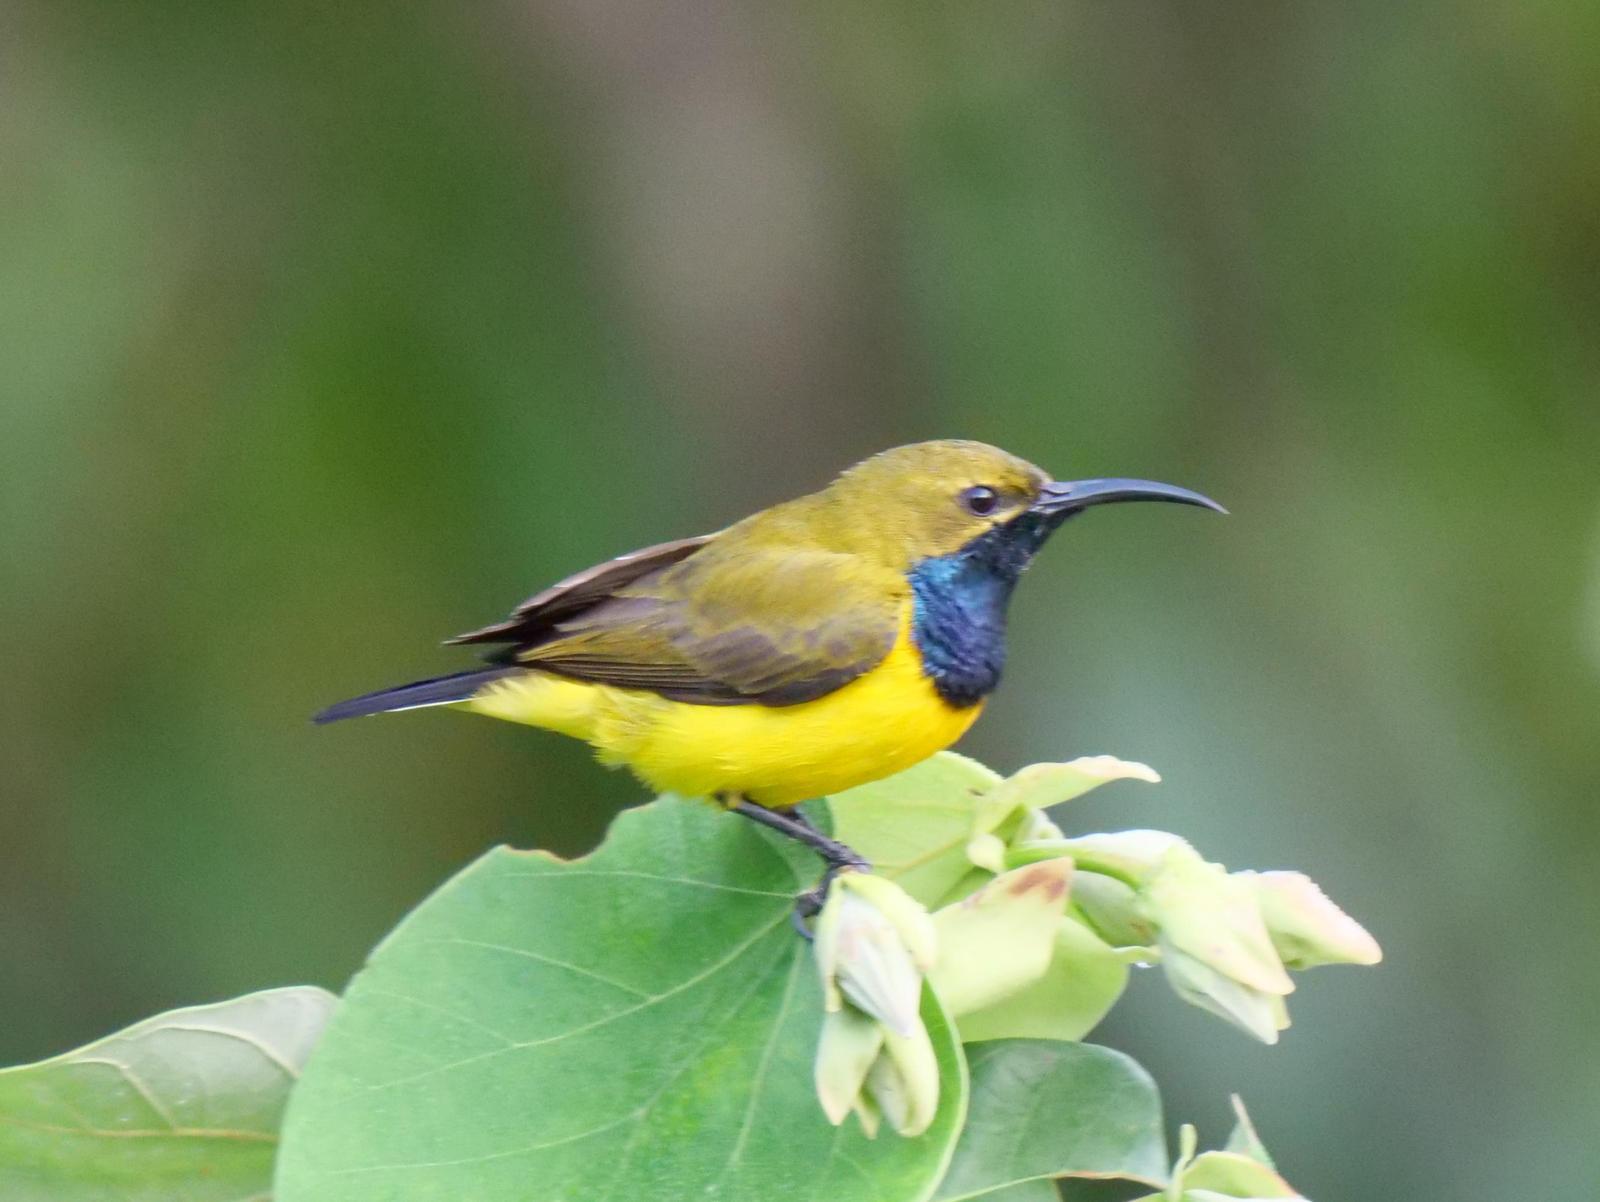 Olive-backed Sunbird Photo by Peter Lowe